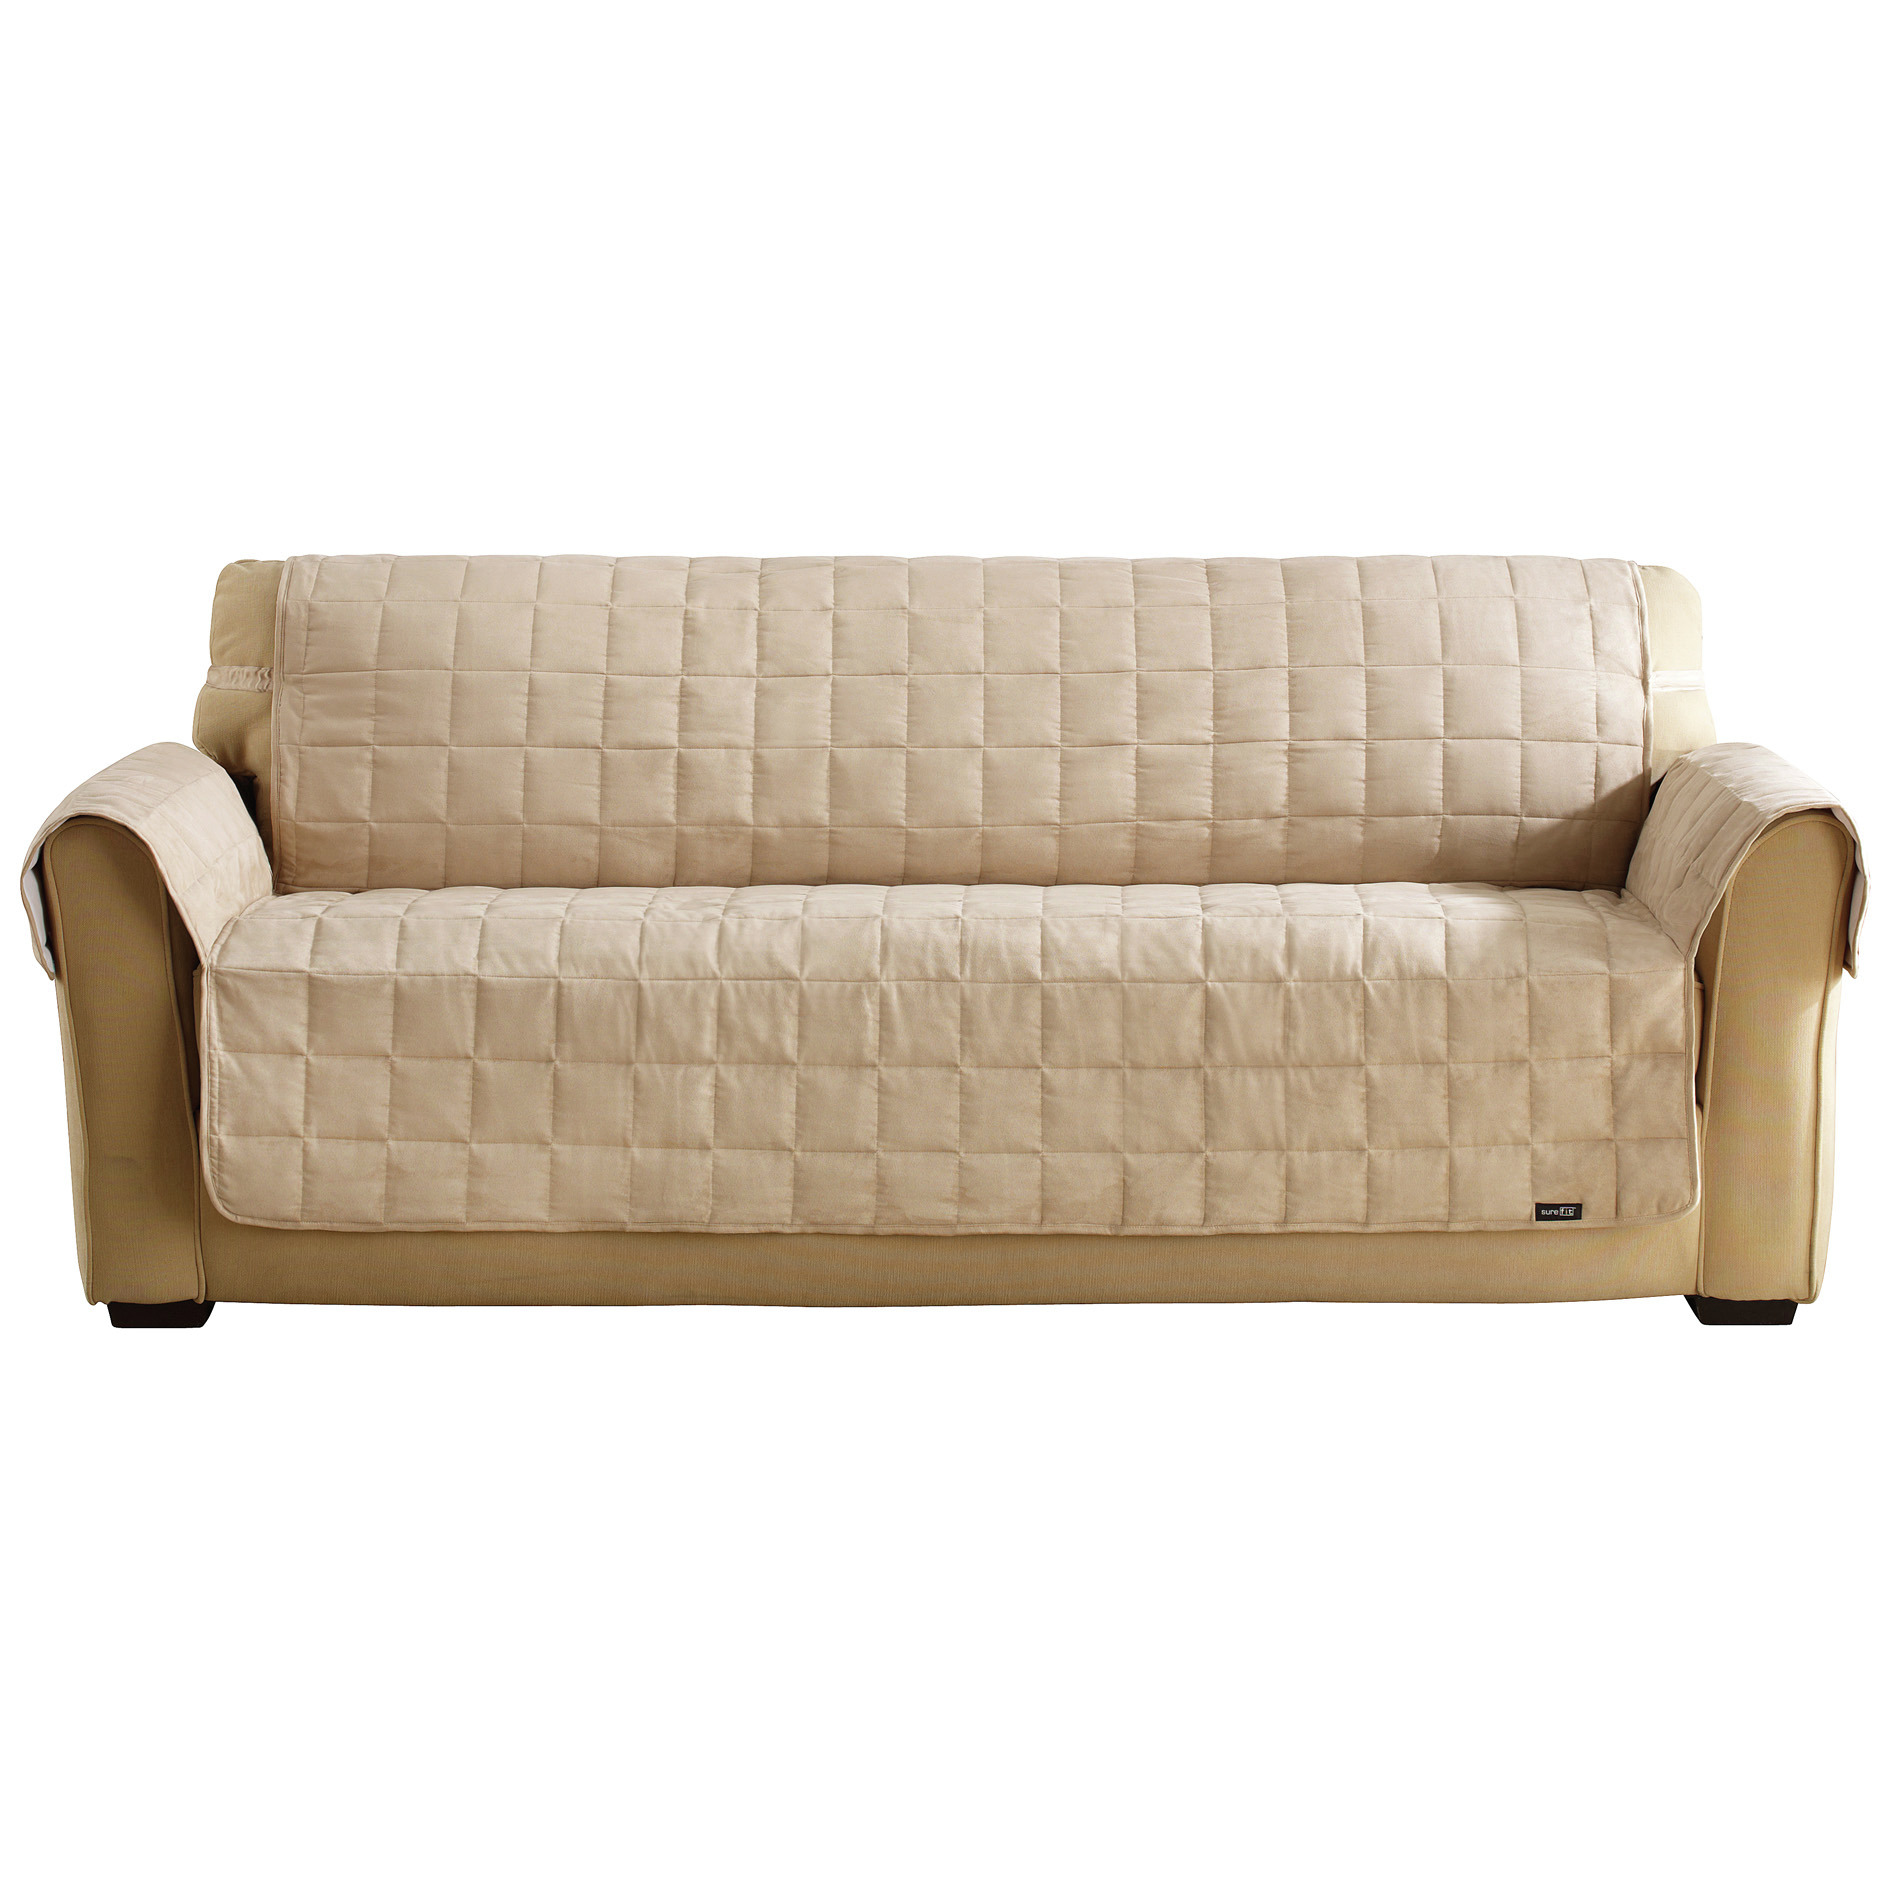 Sure Fit Middleton One Piece Sofa Slipcover - Champagne